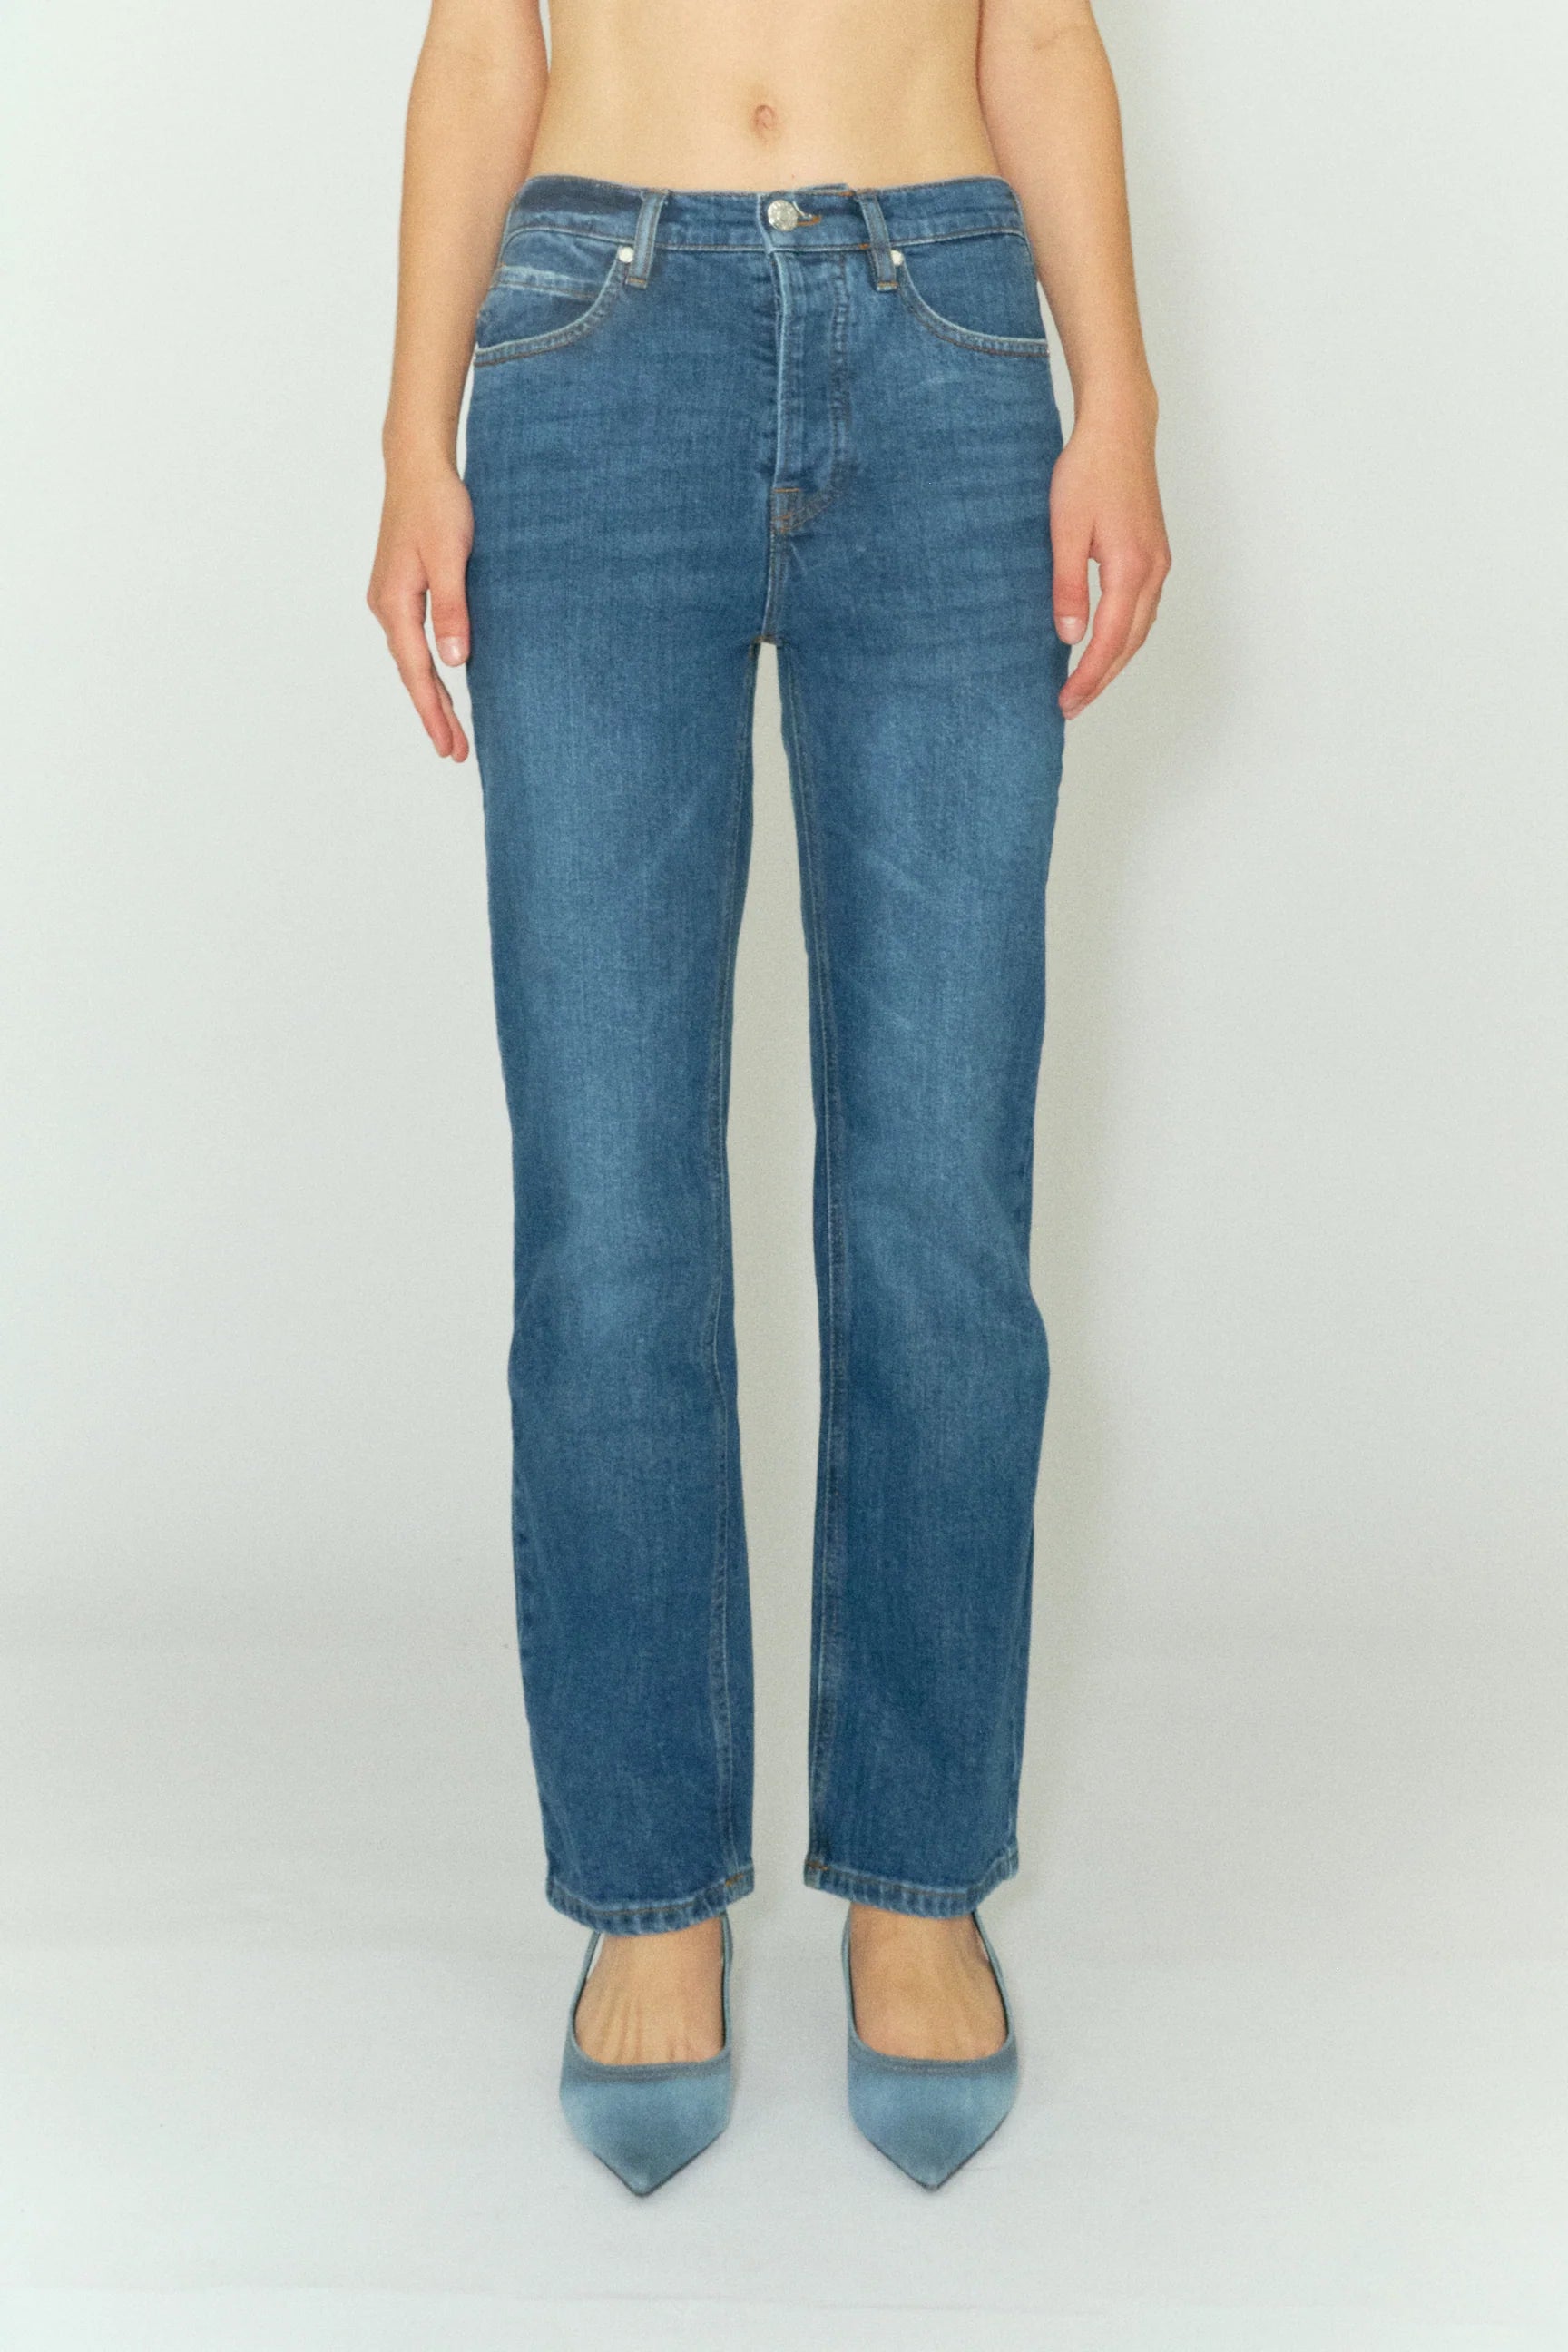 A woman is standing in a pair of Tomorrow Denim's Marston Jeans - Key West.